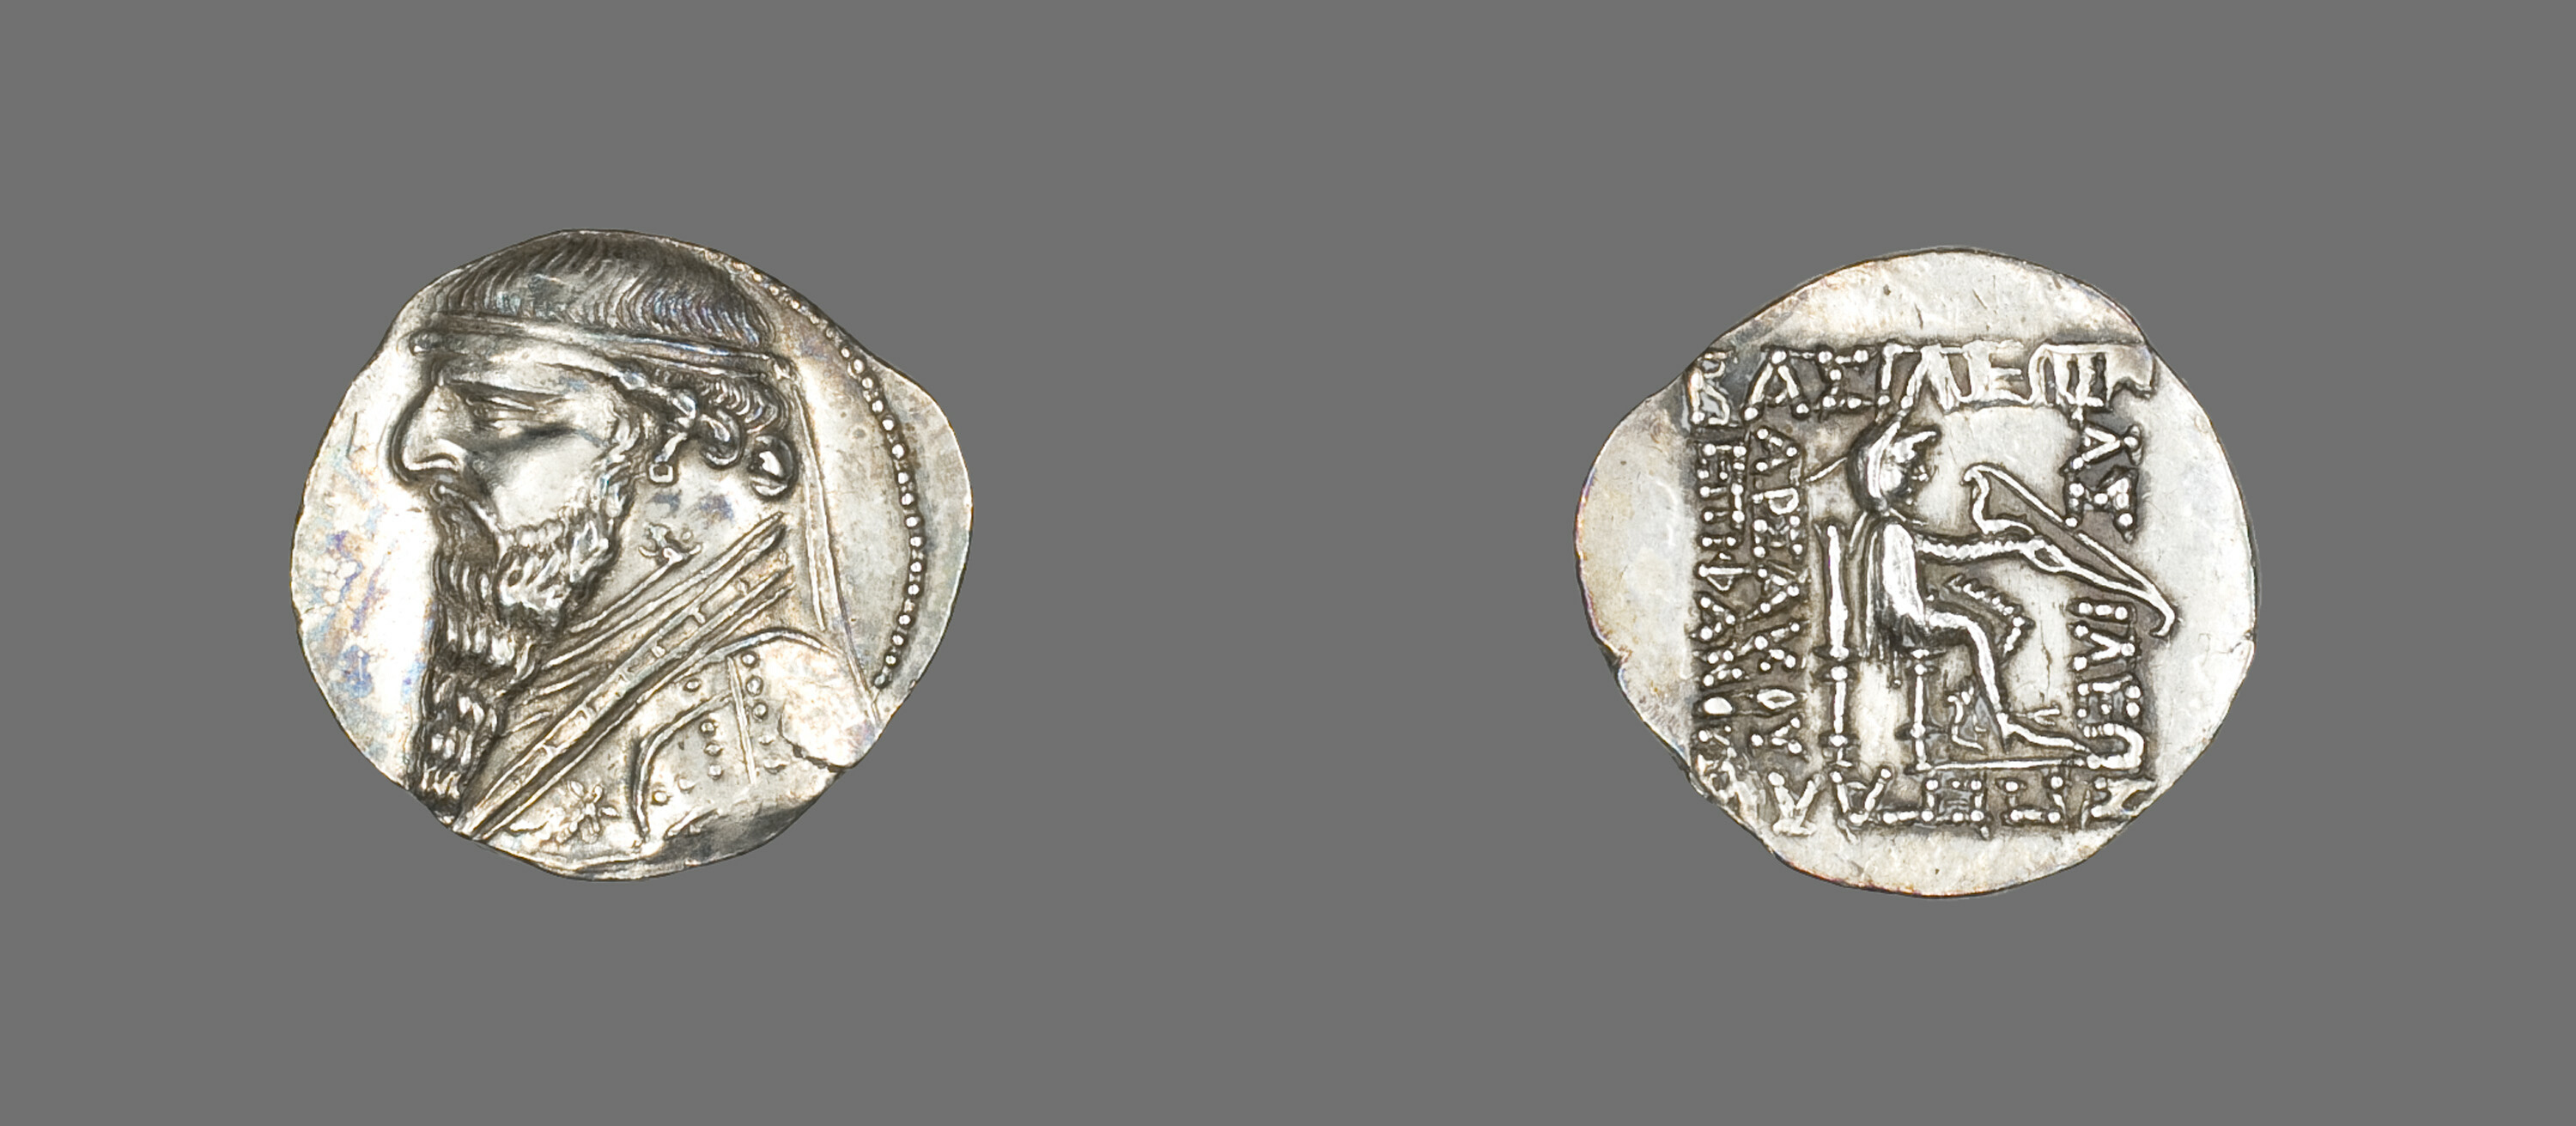 Silver drachm of King Mithridates II the Great of Parthia, 123-88 BCE.jpg